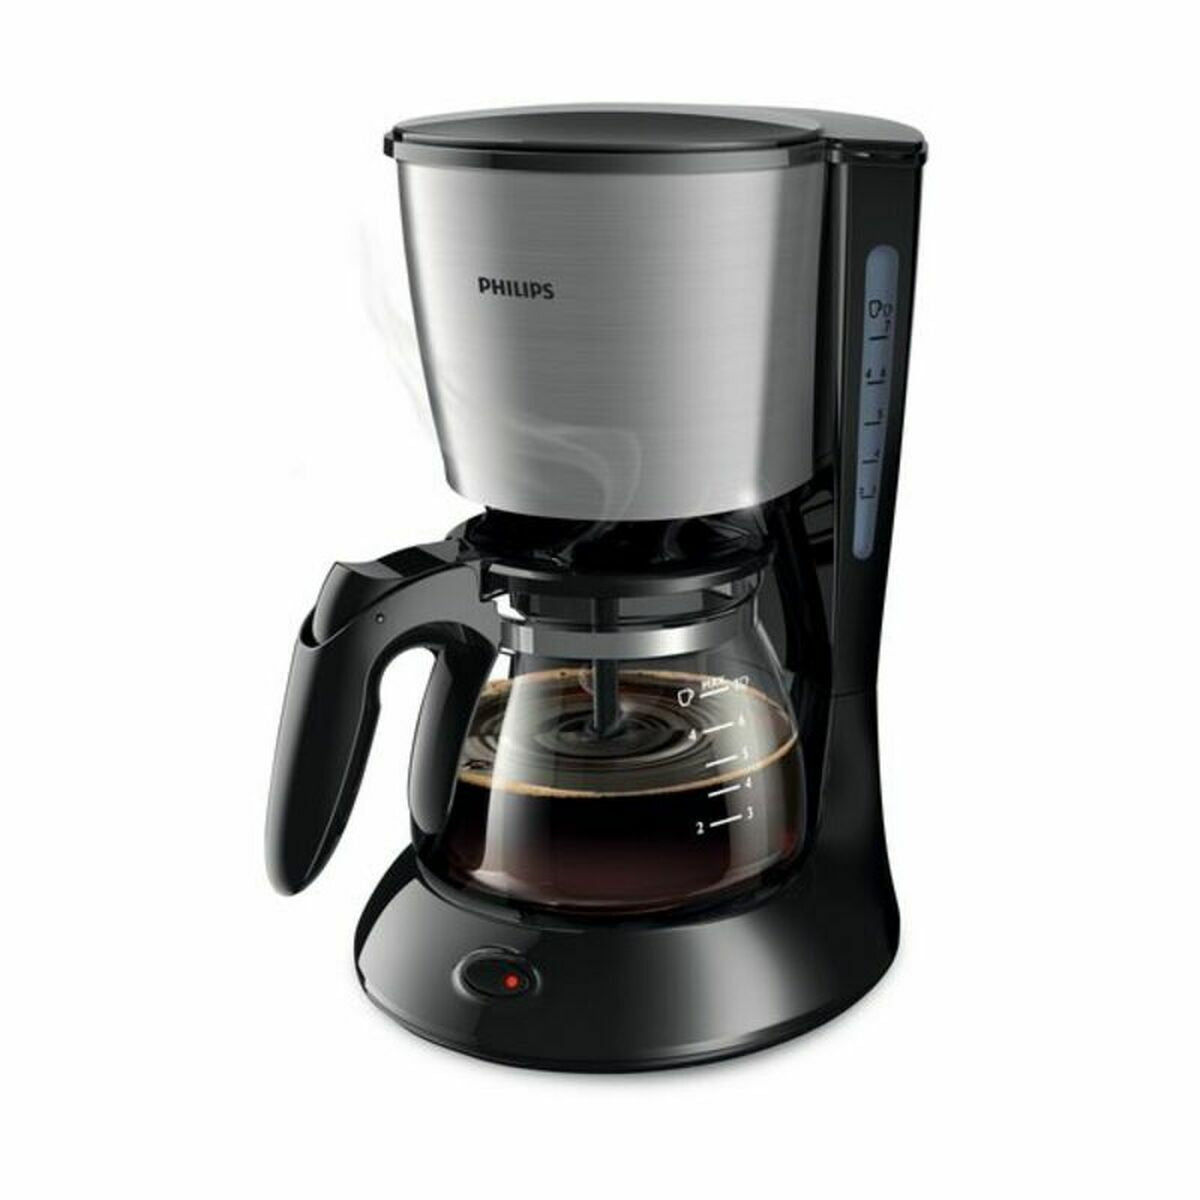 Cafetera Eléctrica Philips Cafetera HD7435/20 700 W Negro 700 W 600 ml 6 Tazas